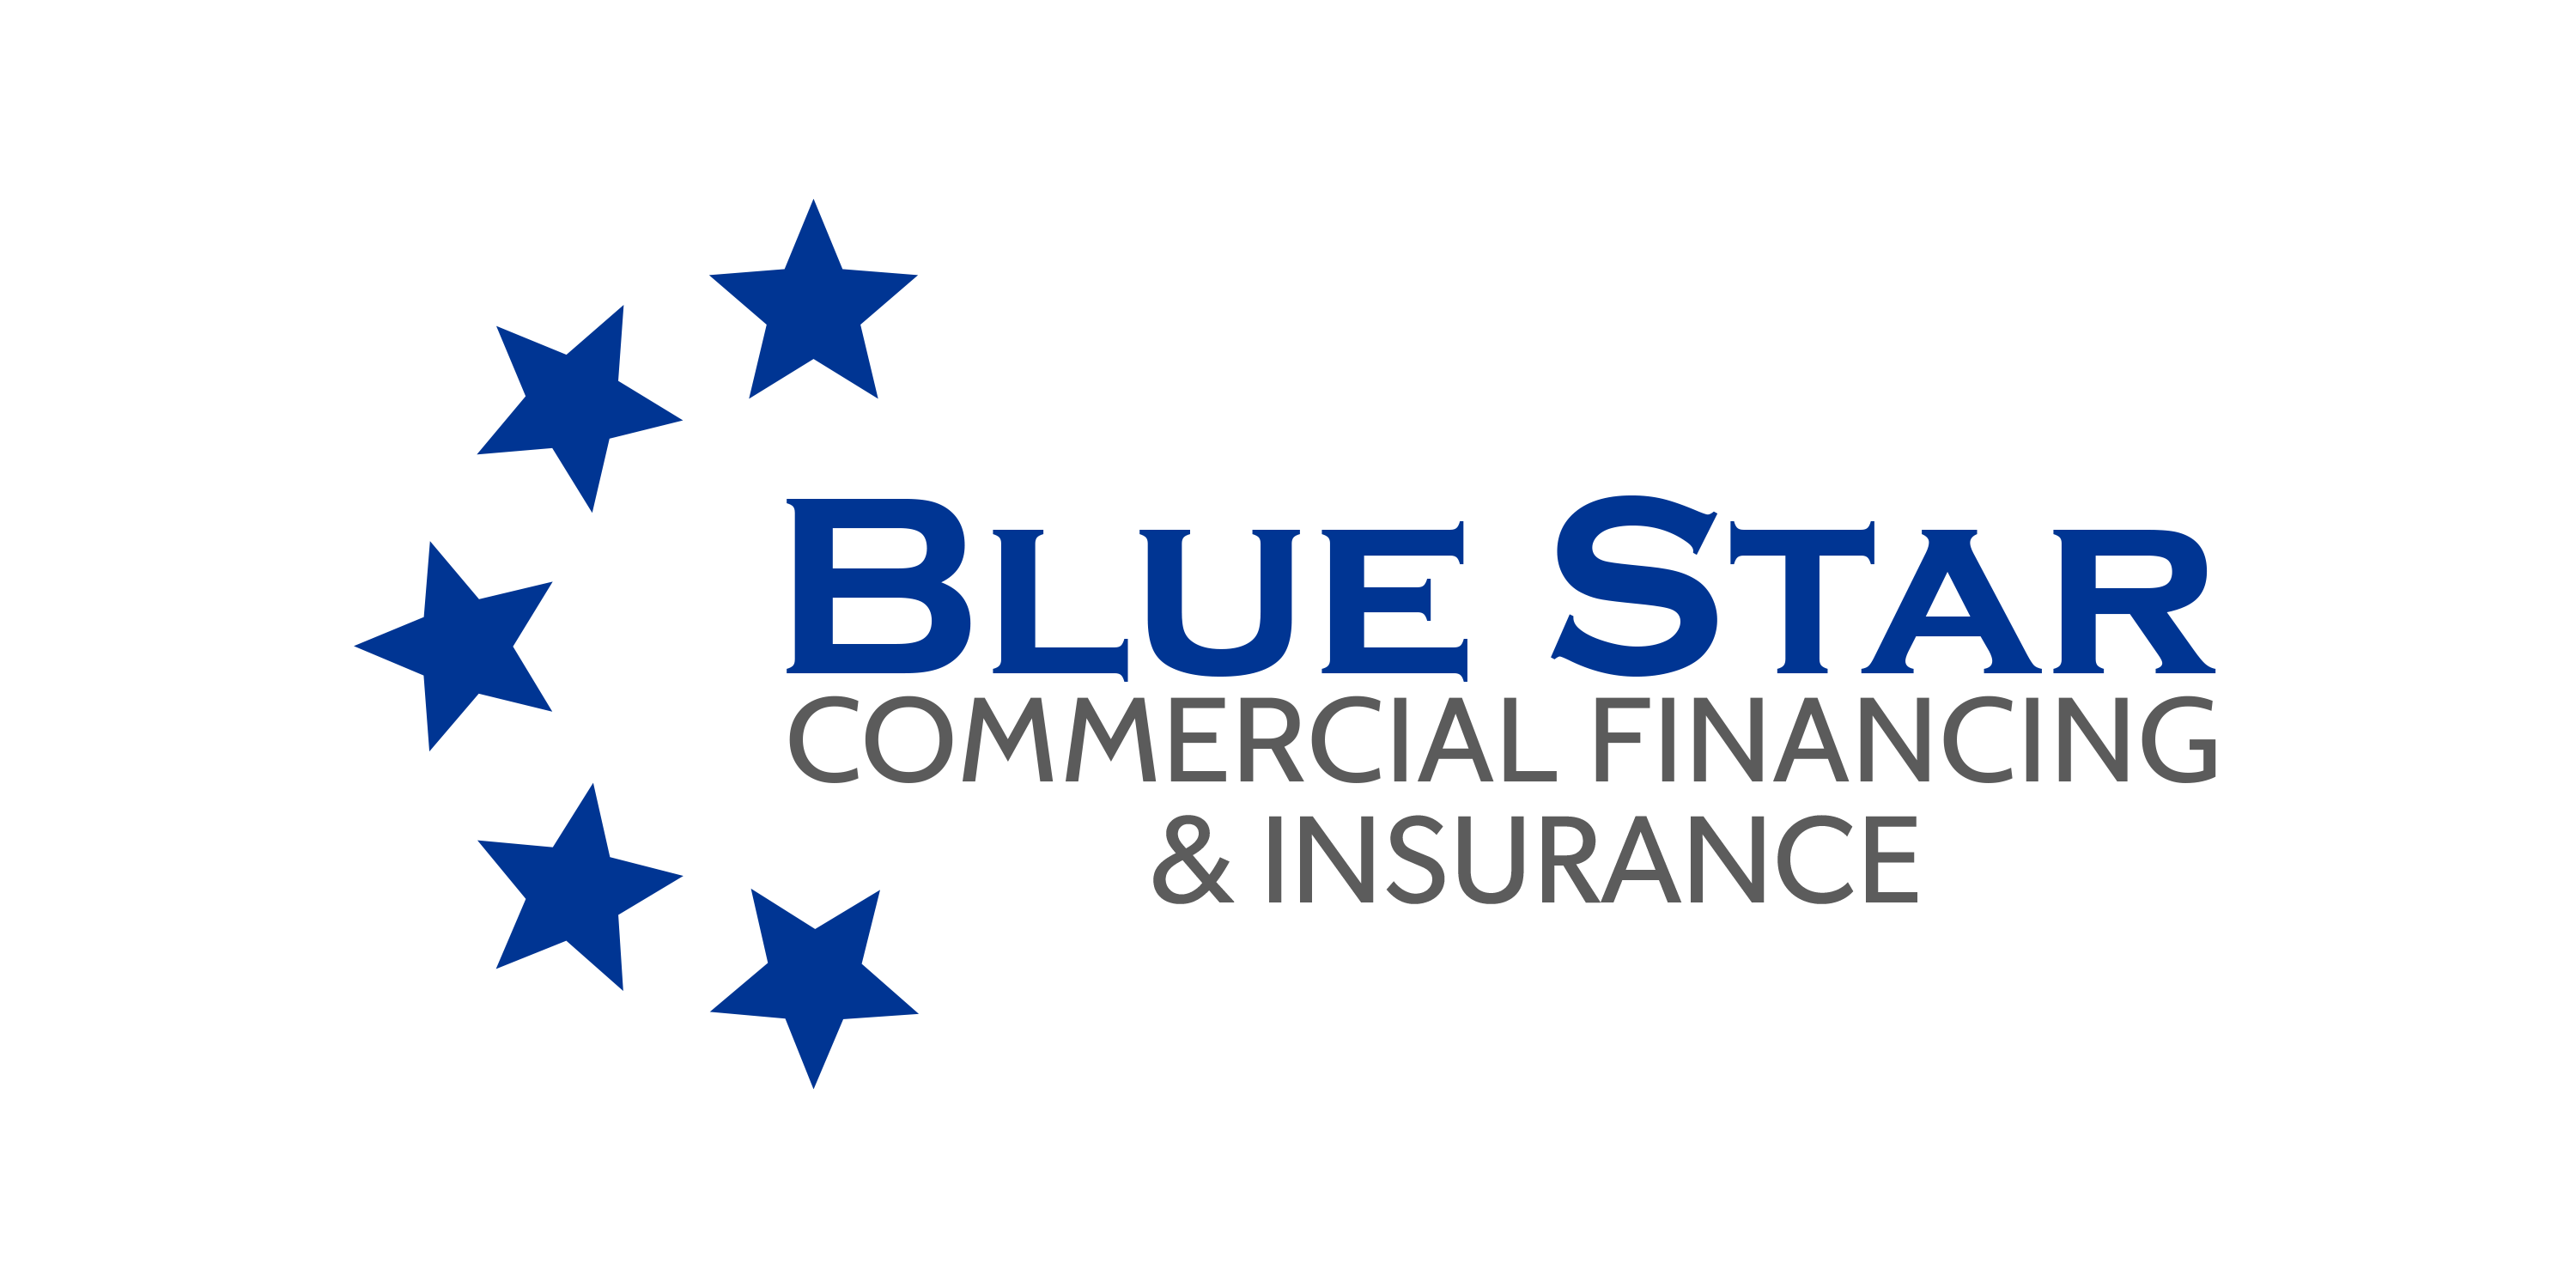 Blue Star Commercial Financing